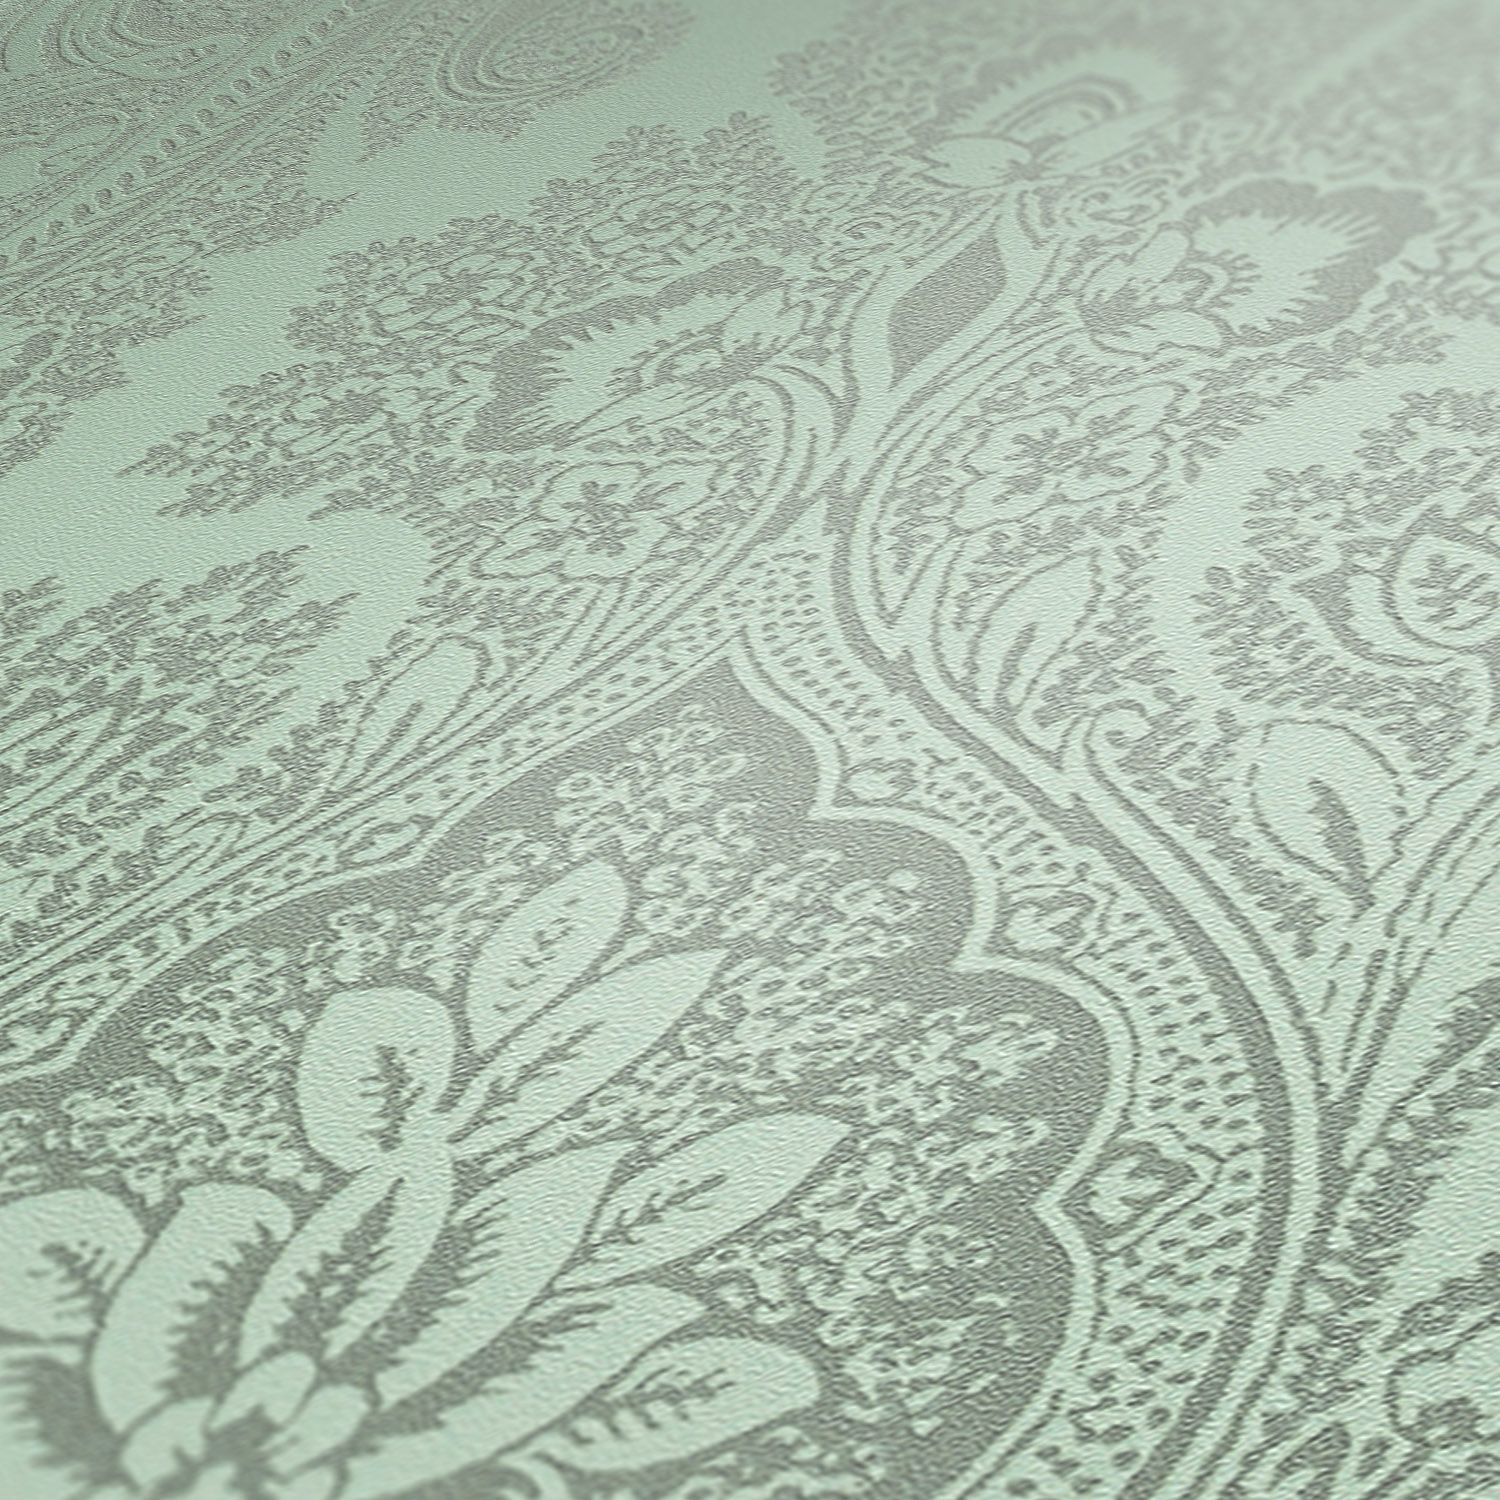 Mint-coloured wallpaper in baroque style AS387081